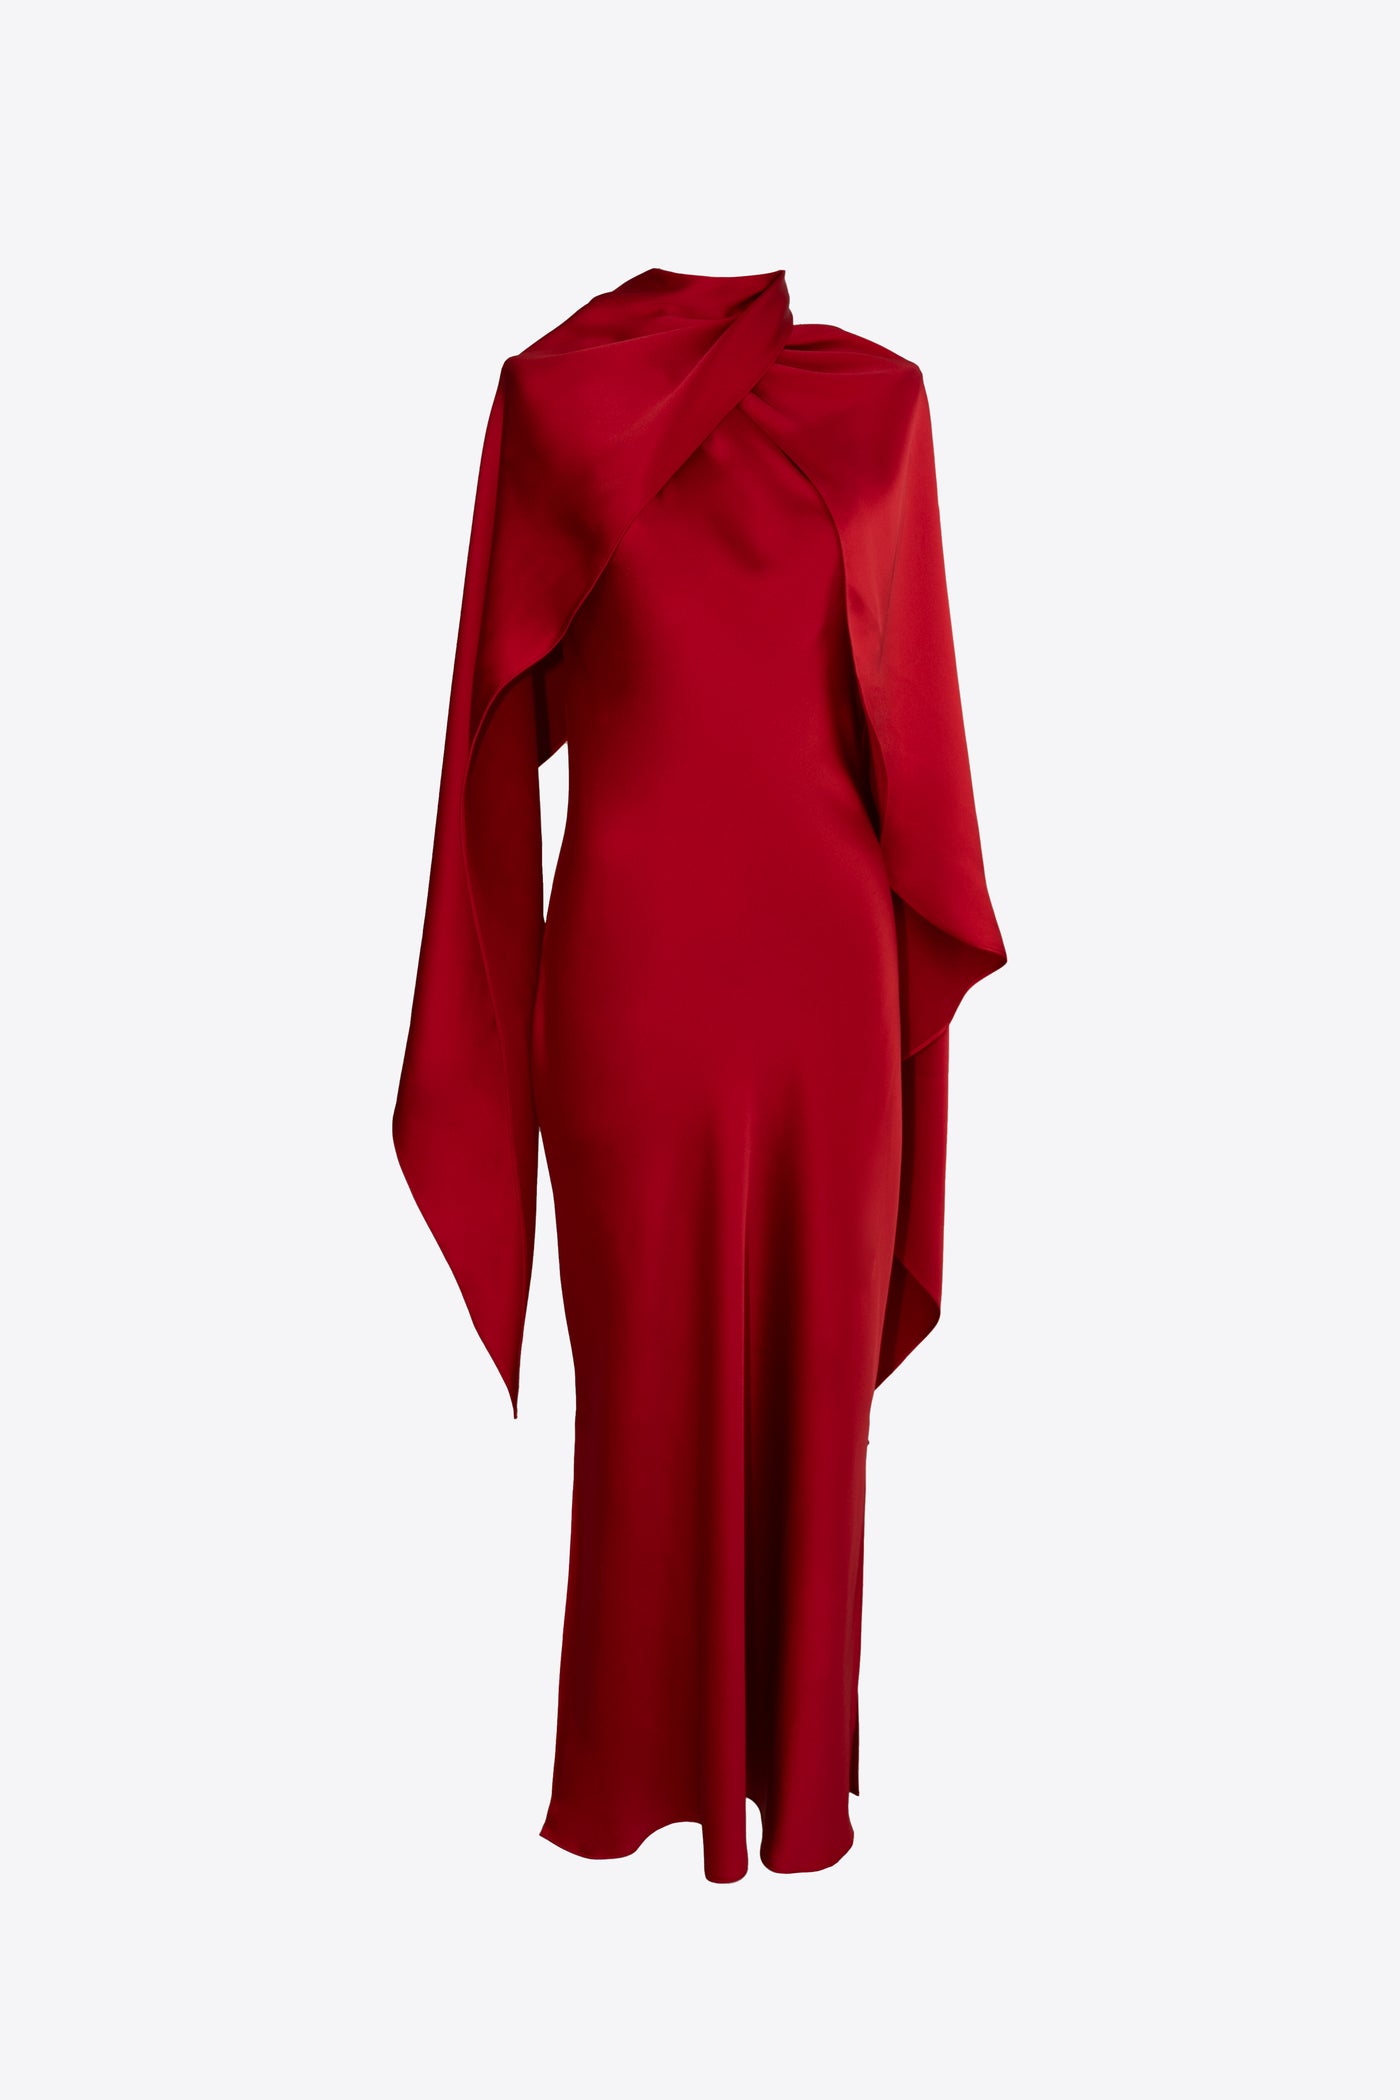 DIANA RED DRESS - PREORDER